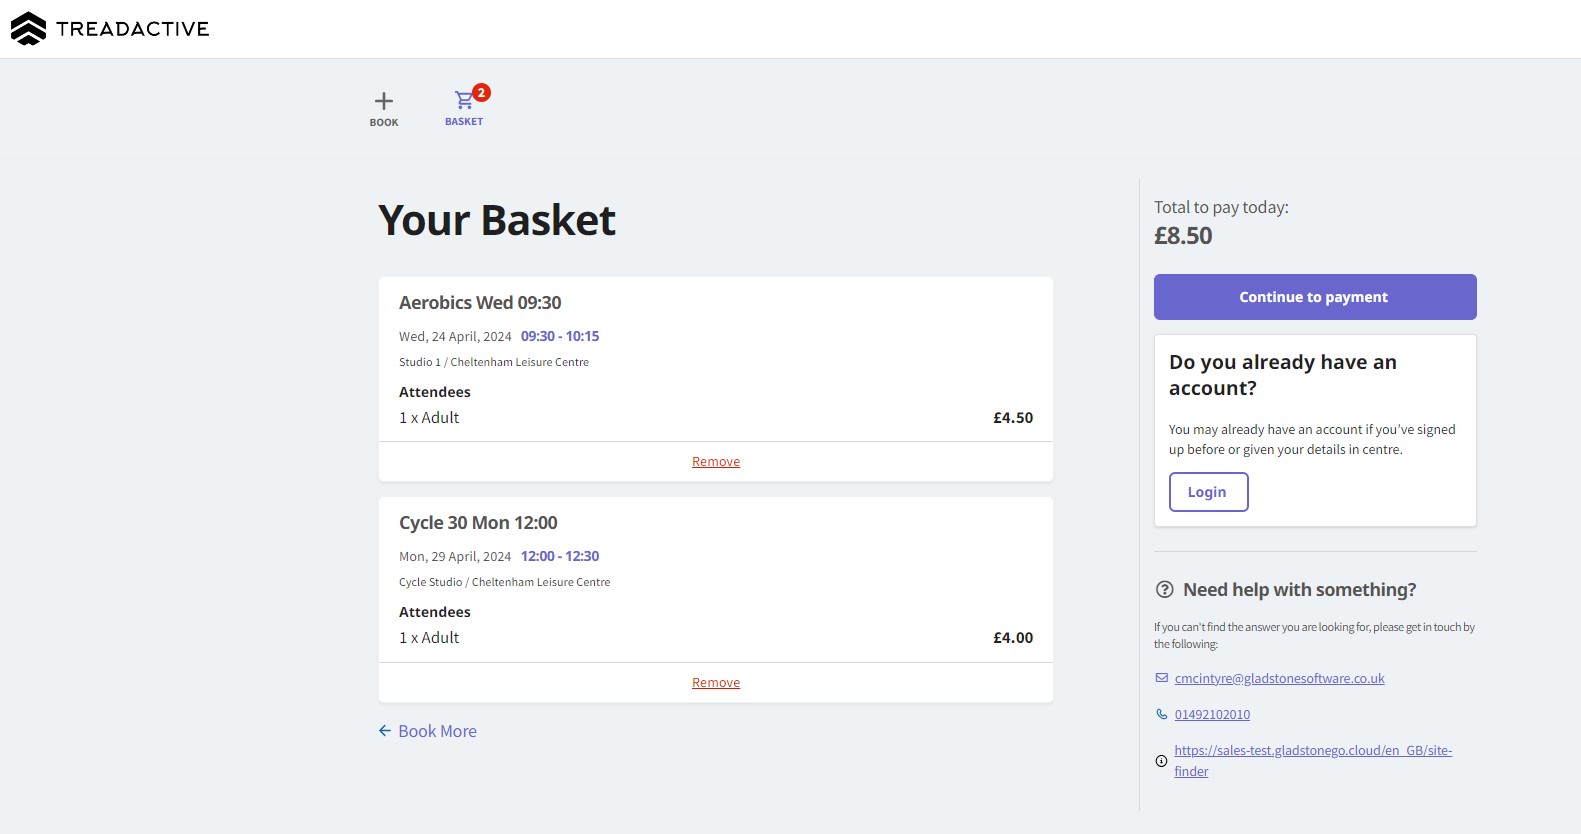 Basket with multiple activities